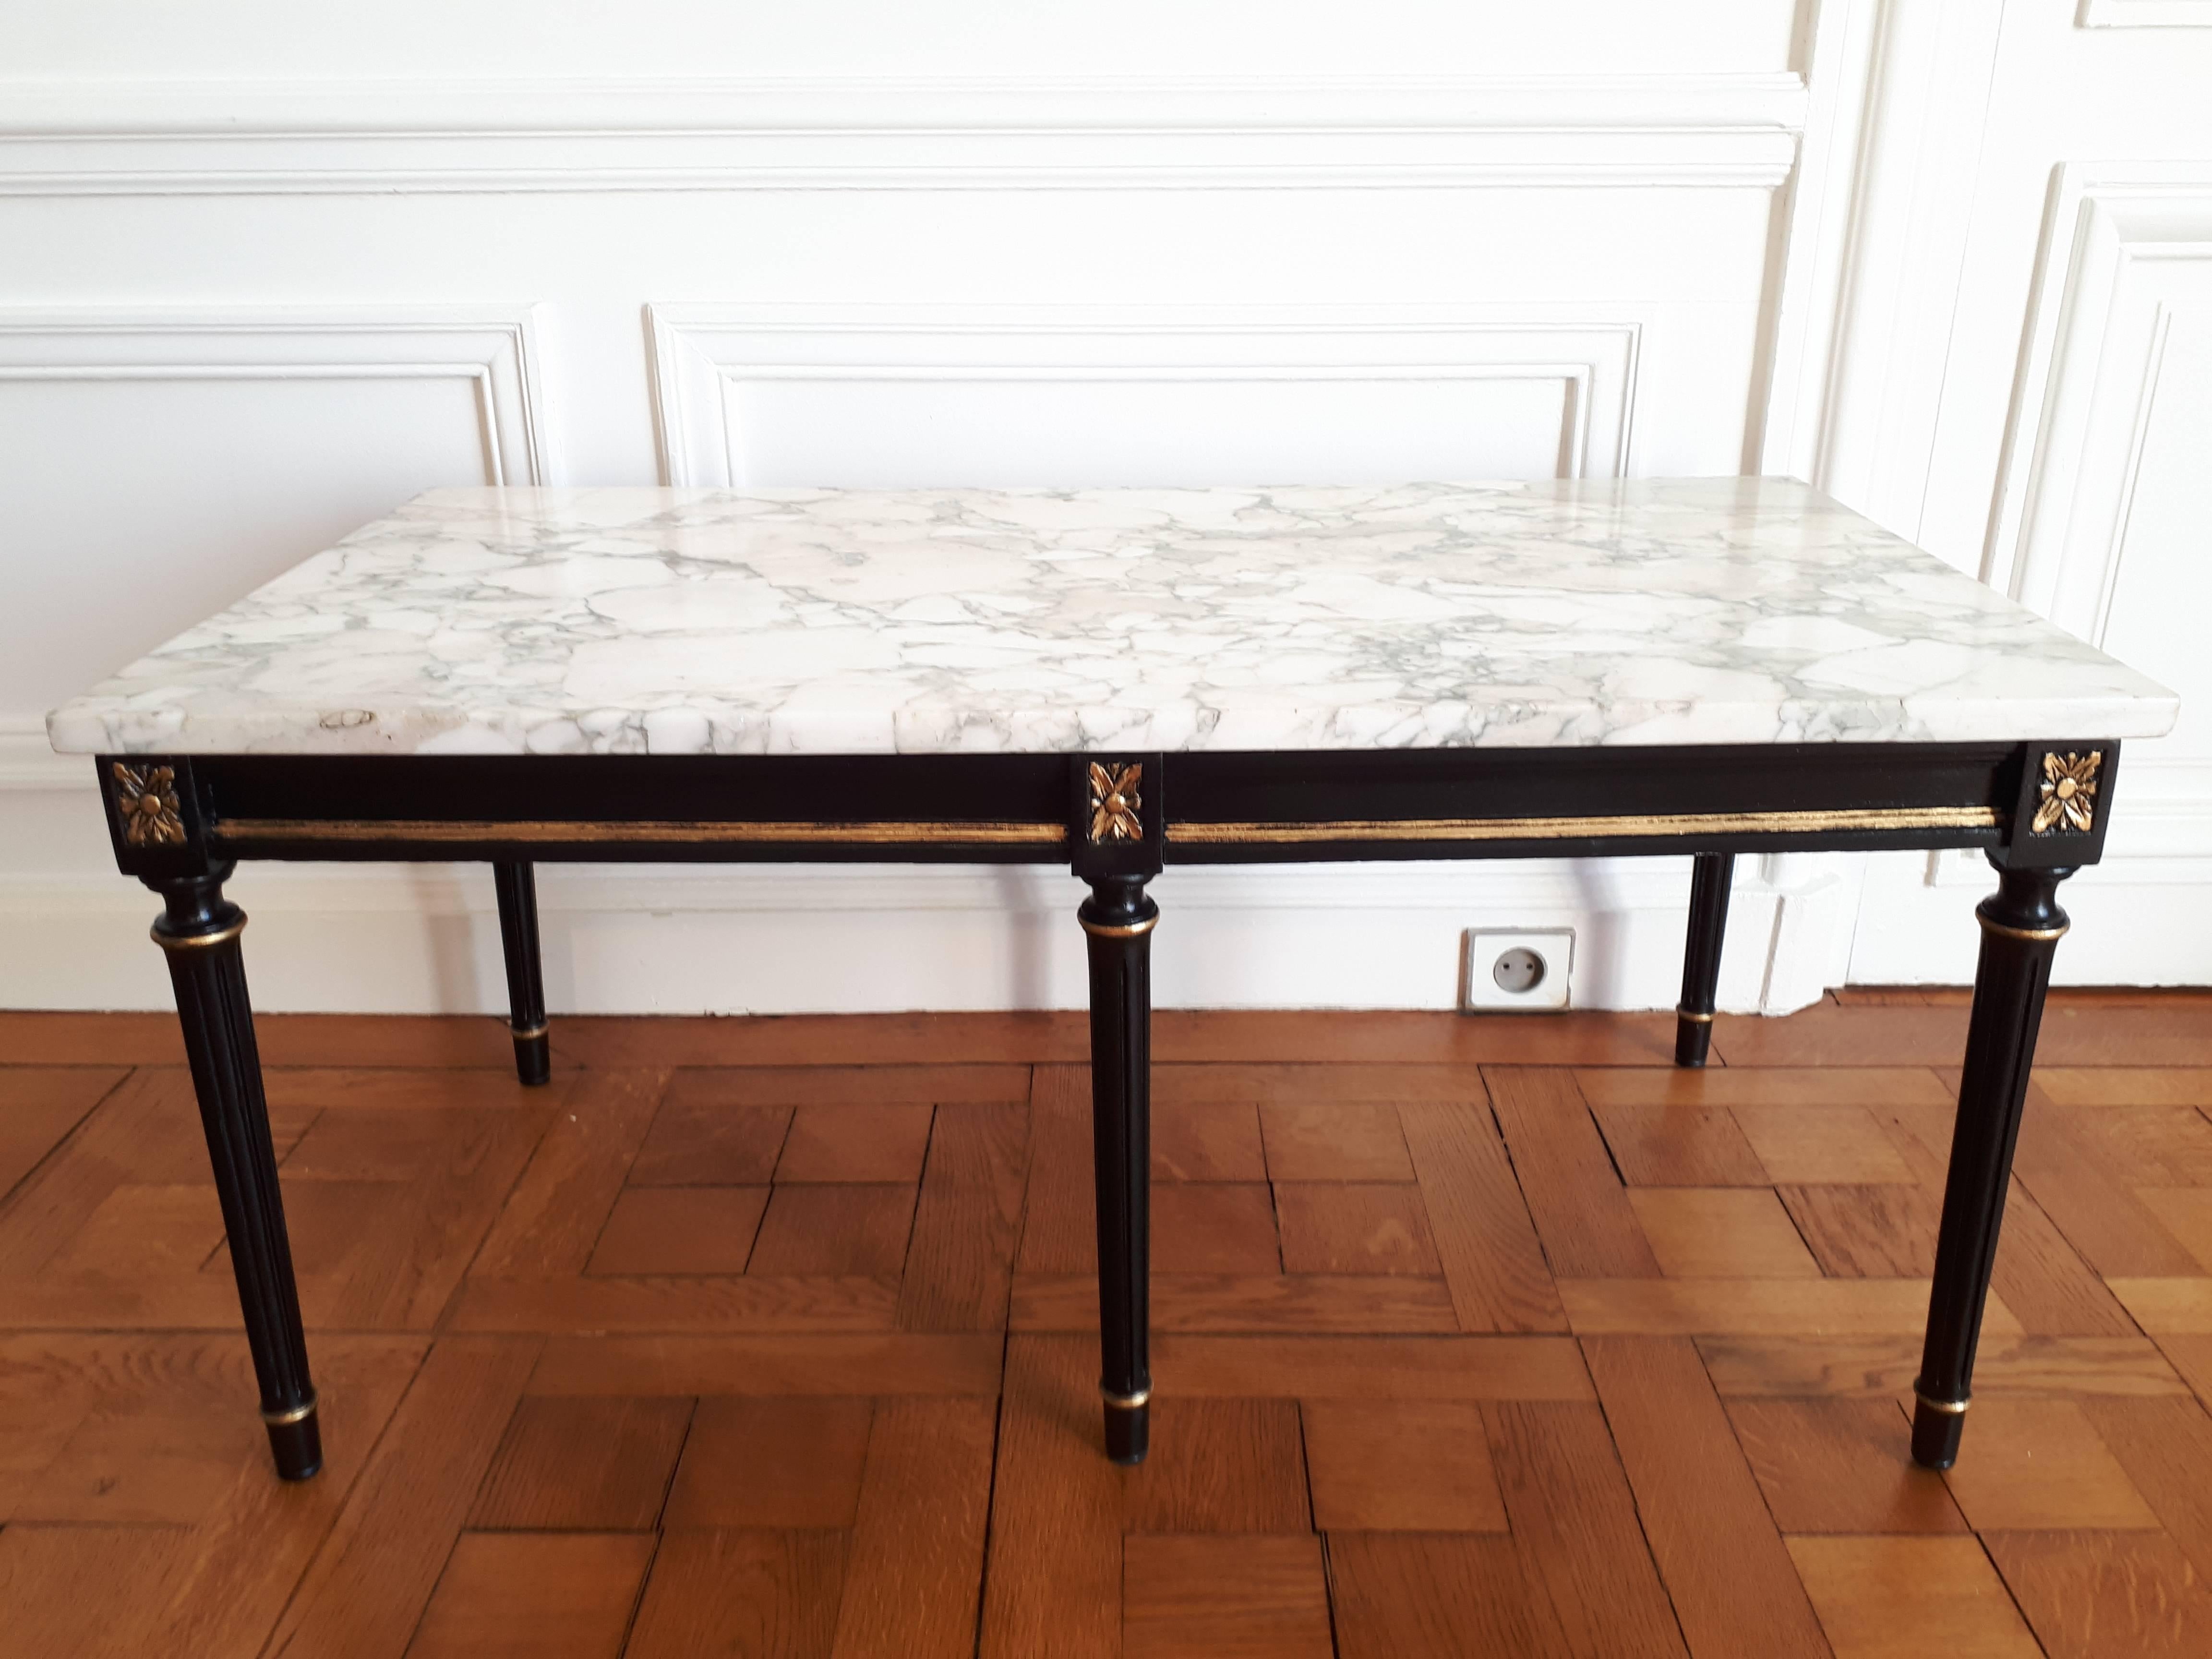 Antique coffee table with a white Carrara marble, painted wood in black and golden wax.
The 6 feet are topped with carved rosettes.